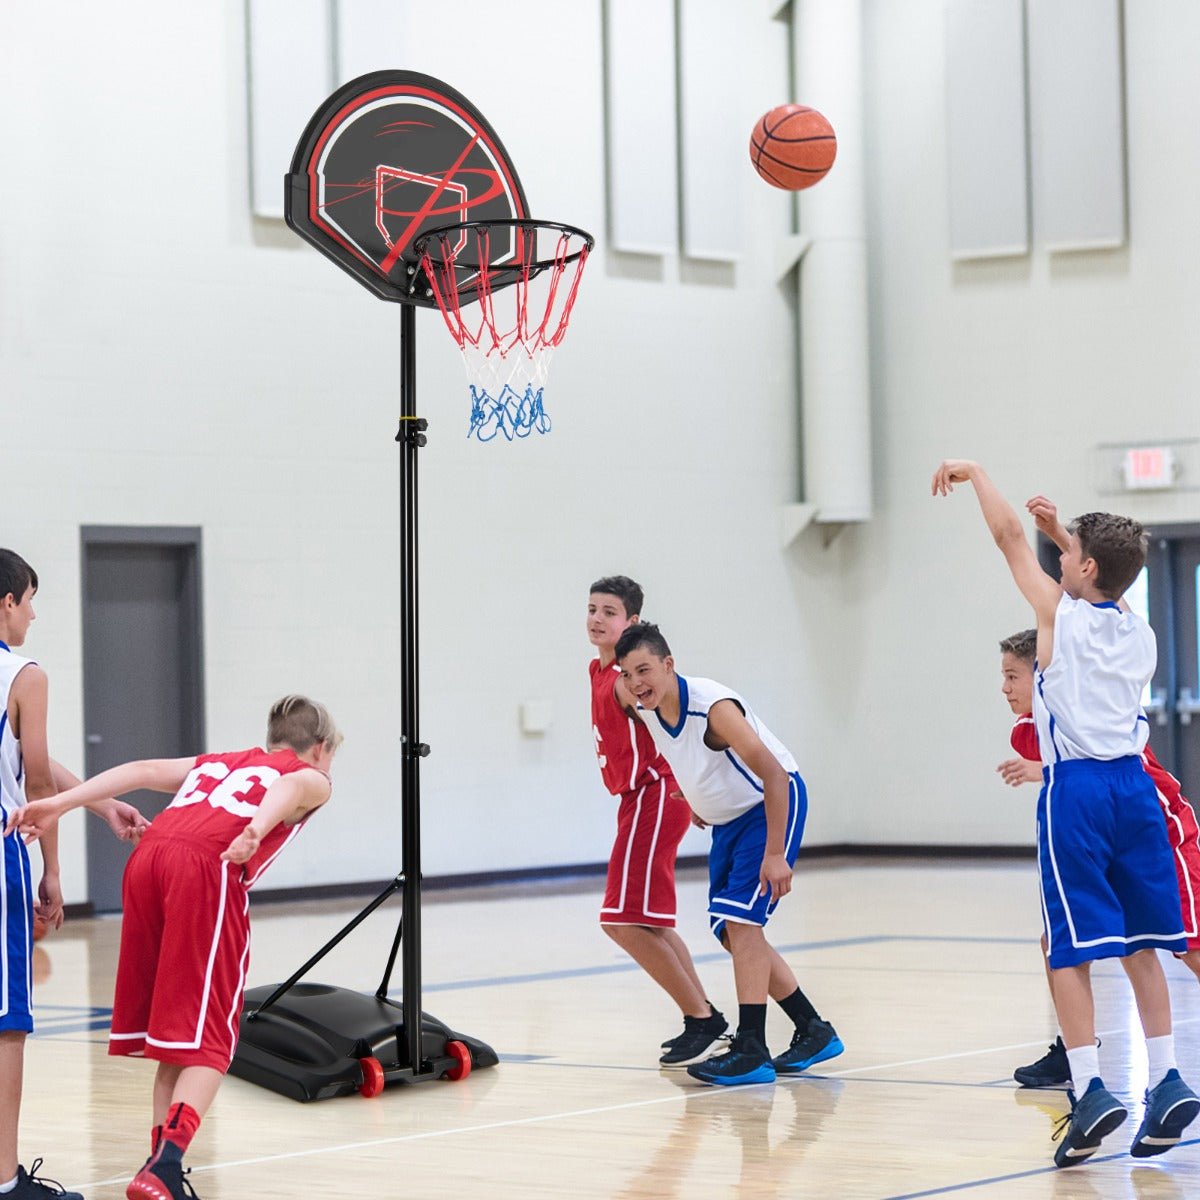 Score Big with Our Portable Basketball Hoop System - Buy Now!